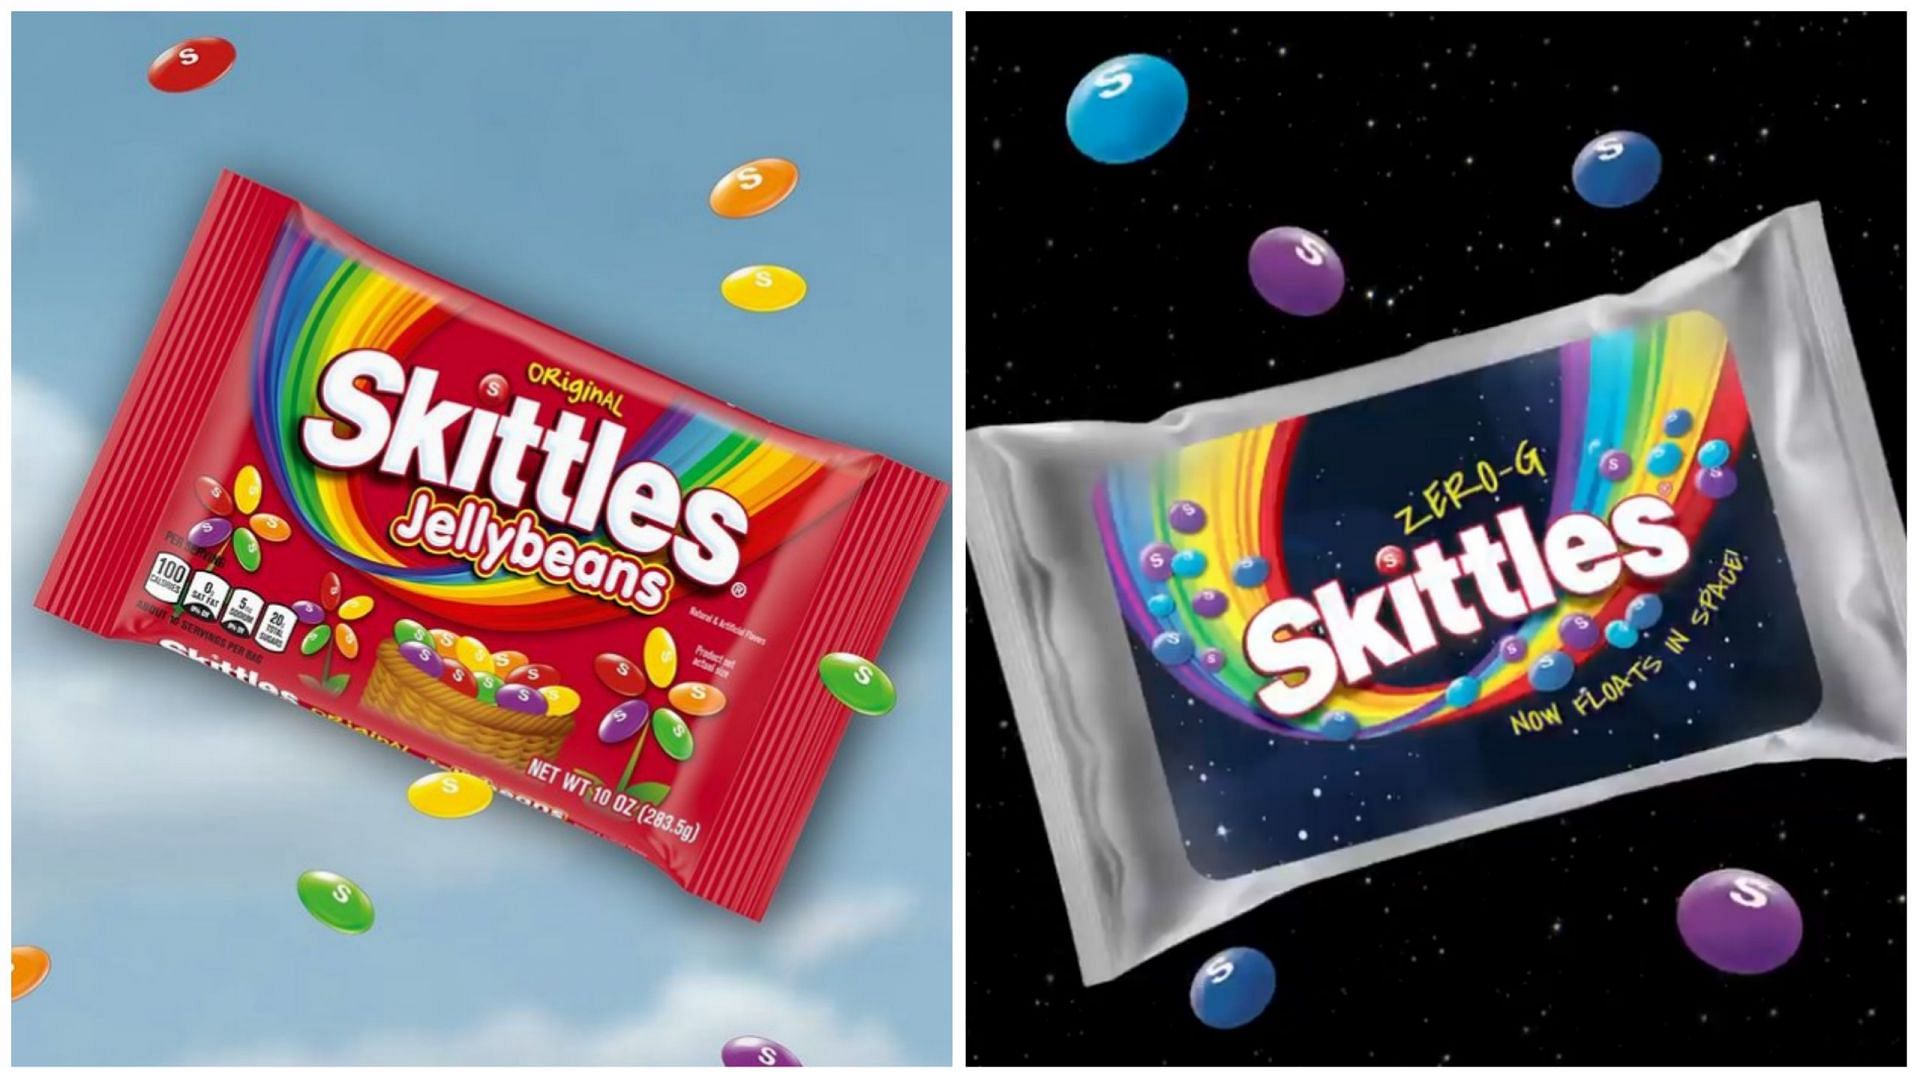 Skittles contain toxin and are unsafe to eat, lawsuit claims